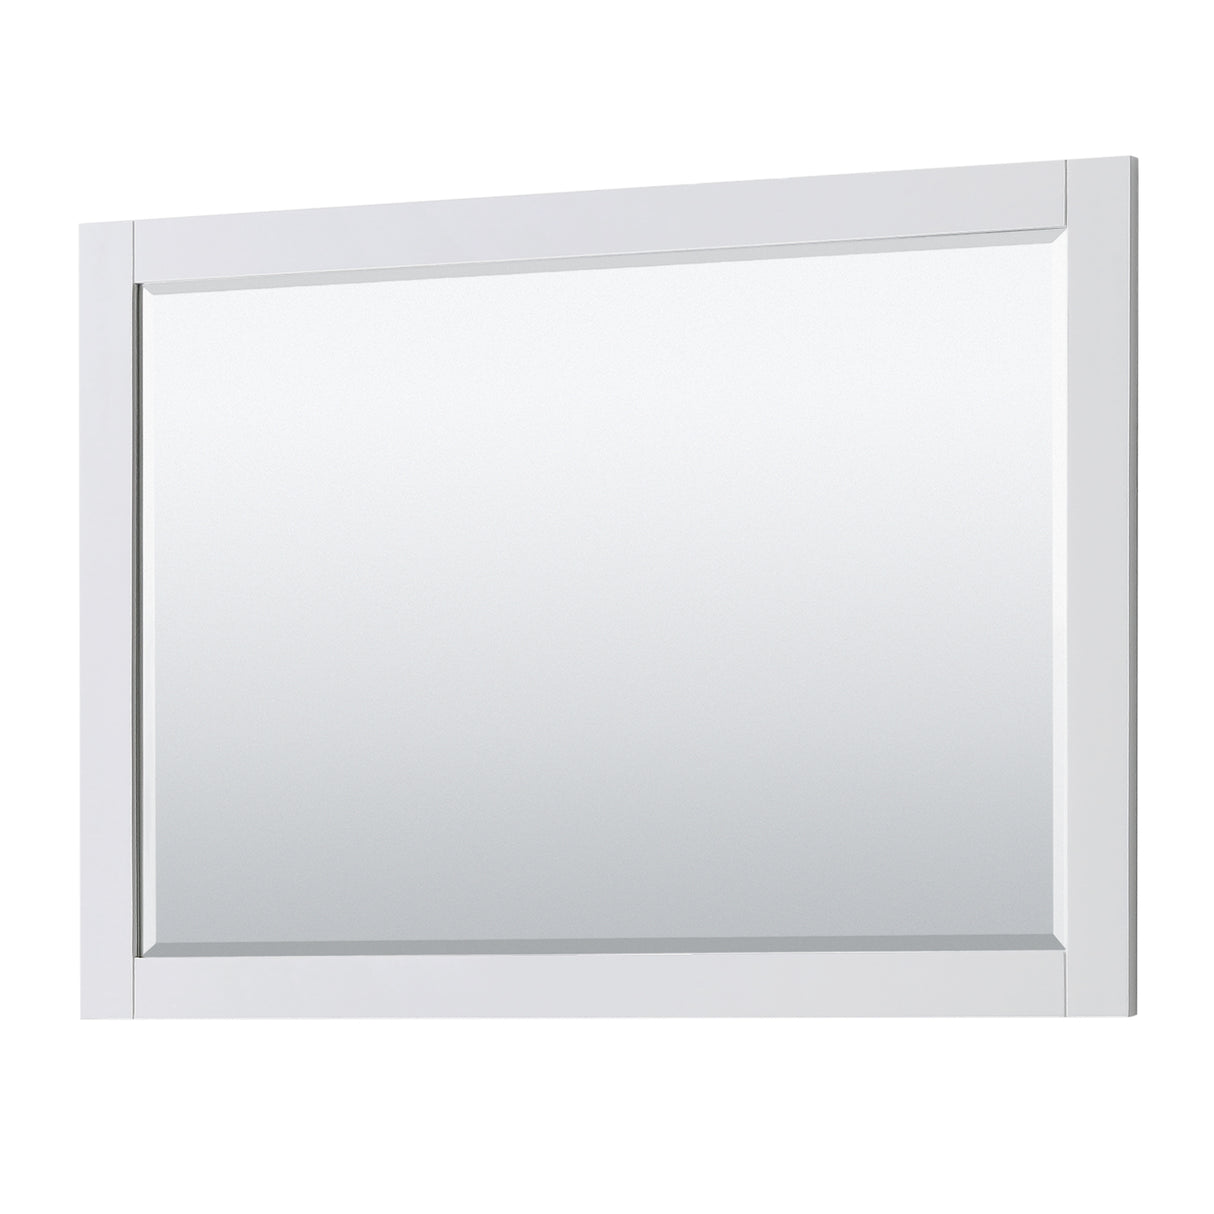 Avery 48 Inch Single Bathroom Vanity in White White Carrara Marble Countertop Undermount Square Sink and 46 Inch Mirror